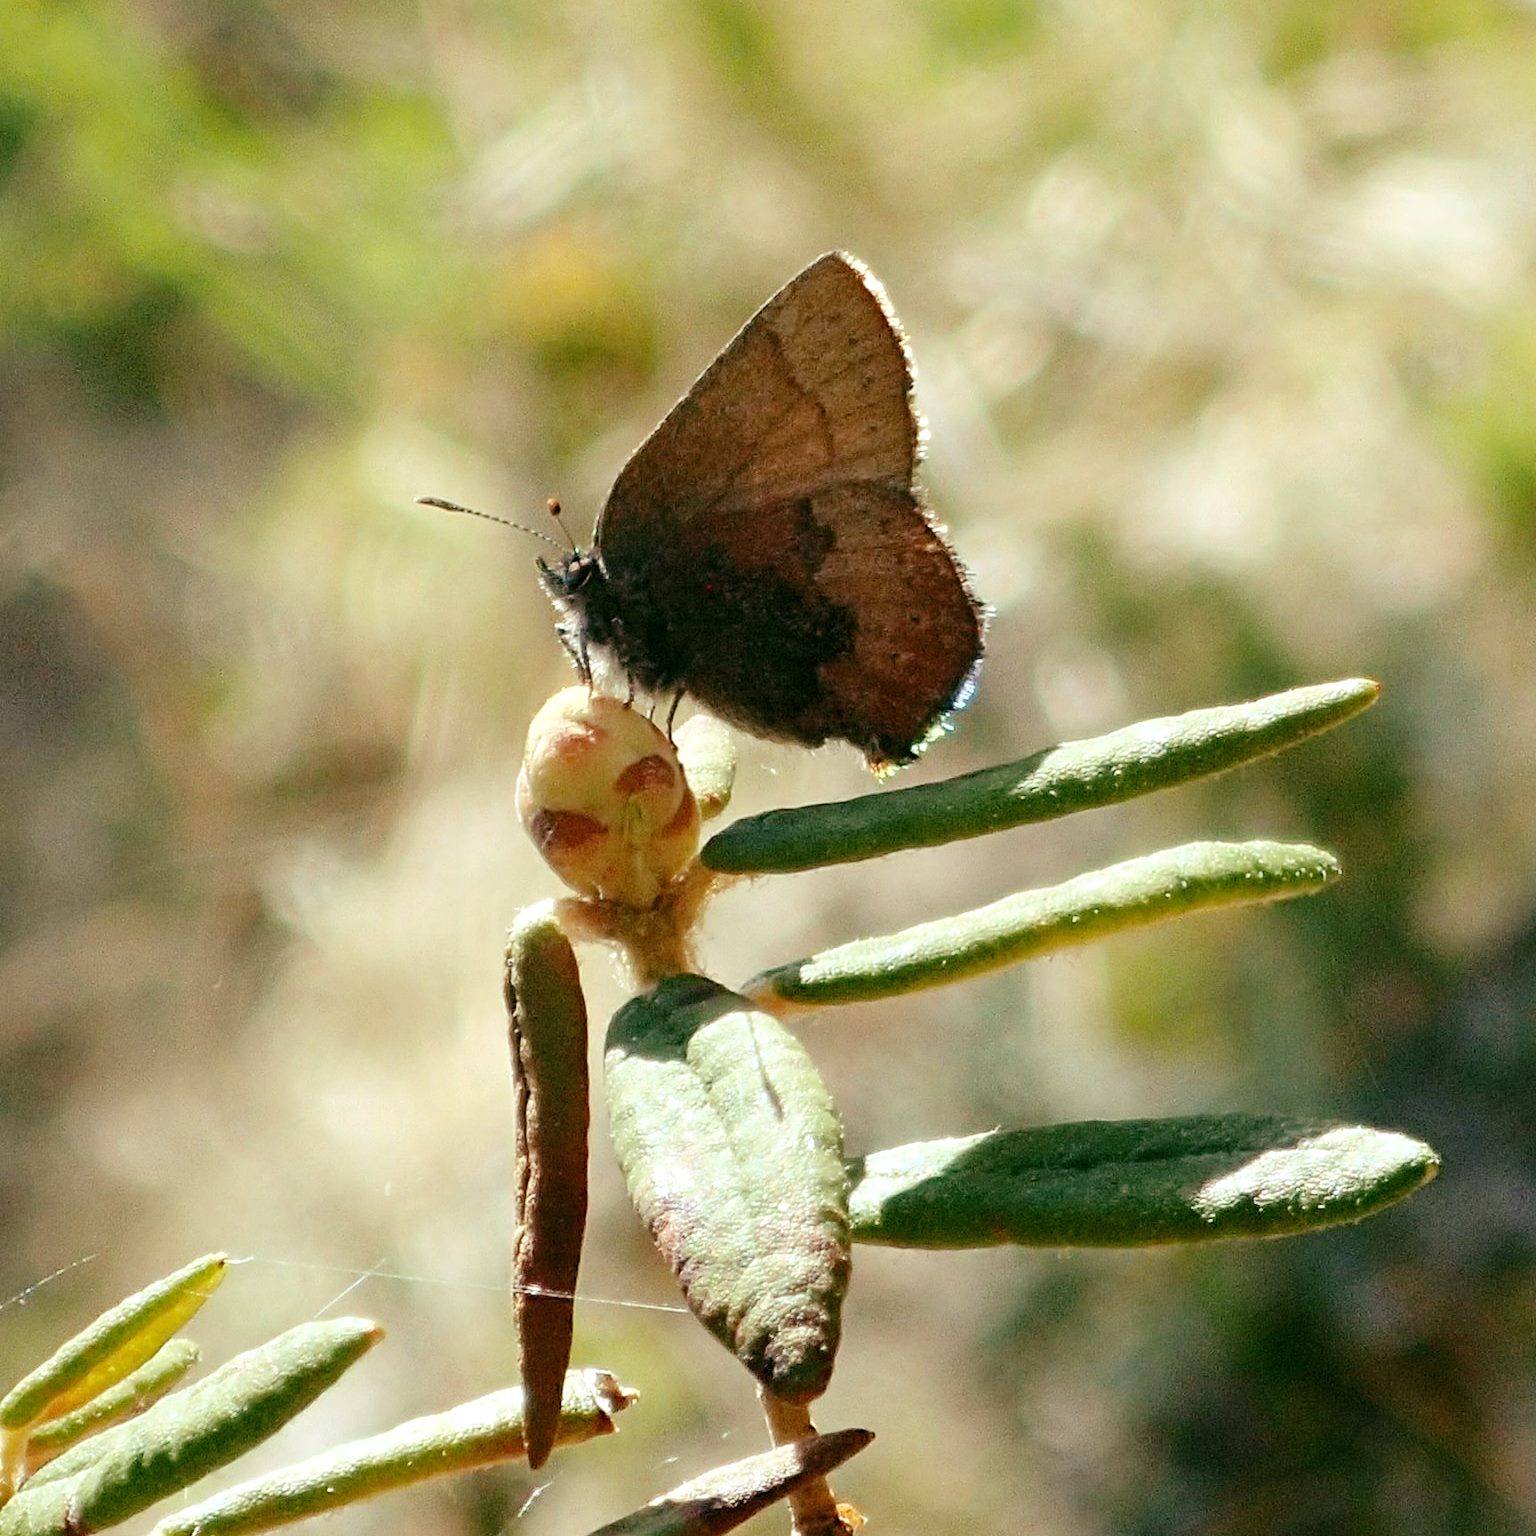 A brown elfin butterfly (Callophrys augustinus) perching on its larval host plant, Labrador tea (Rhododendron groenlandicum)